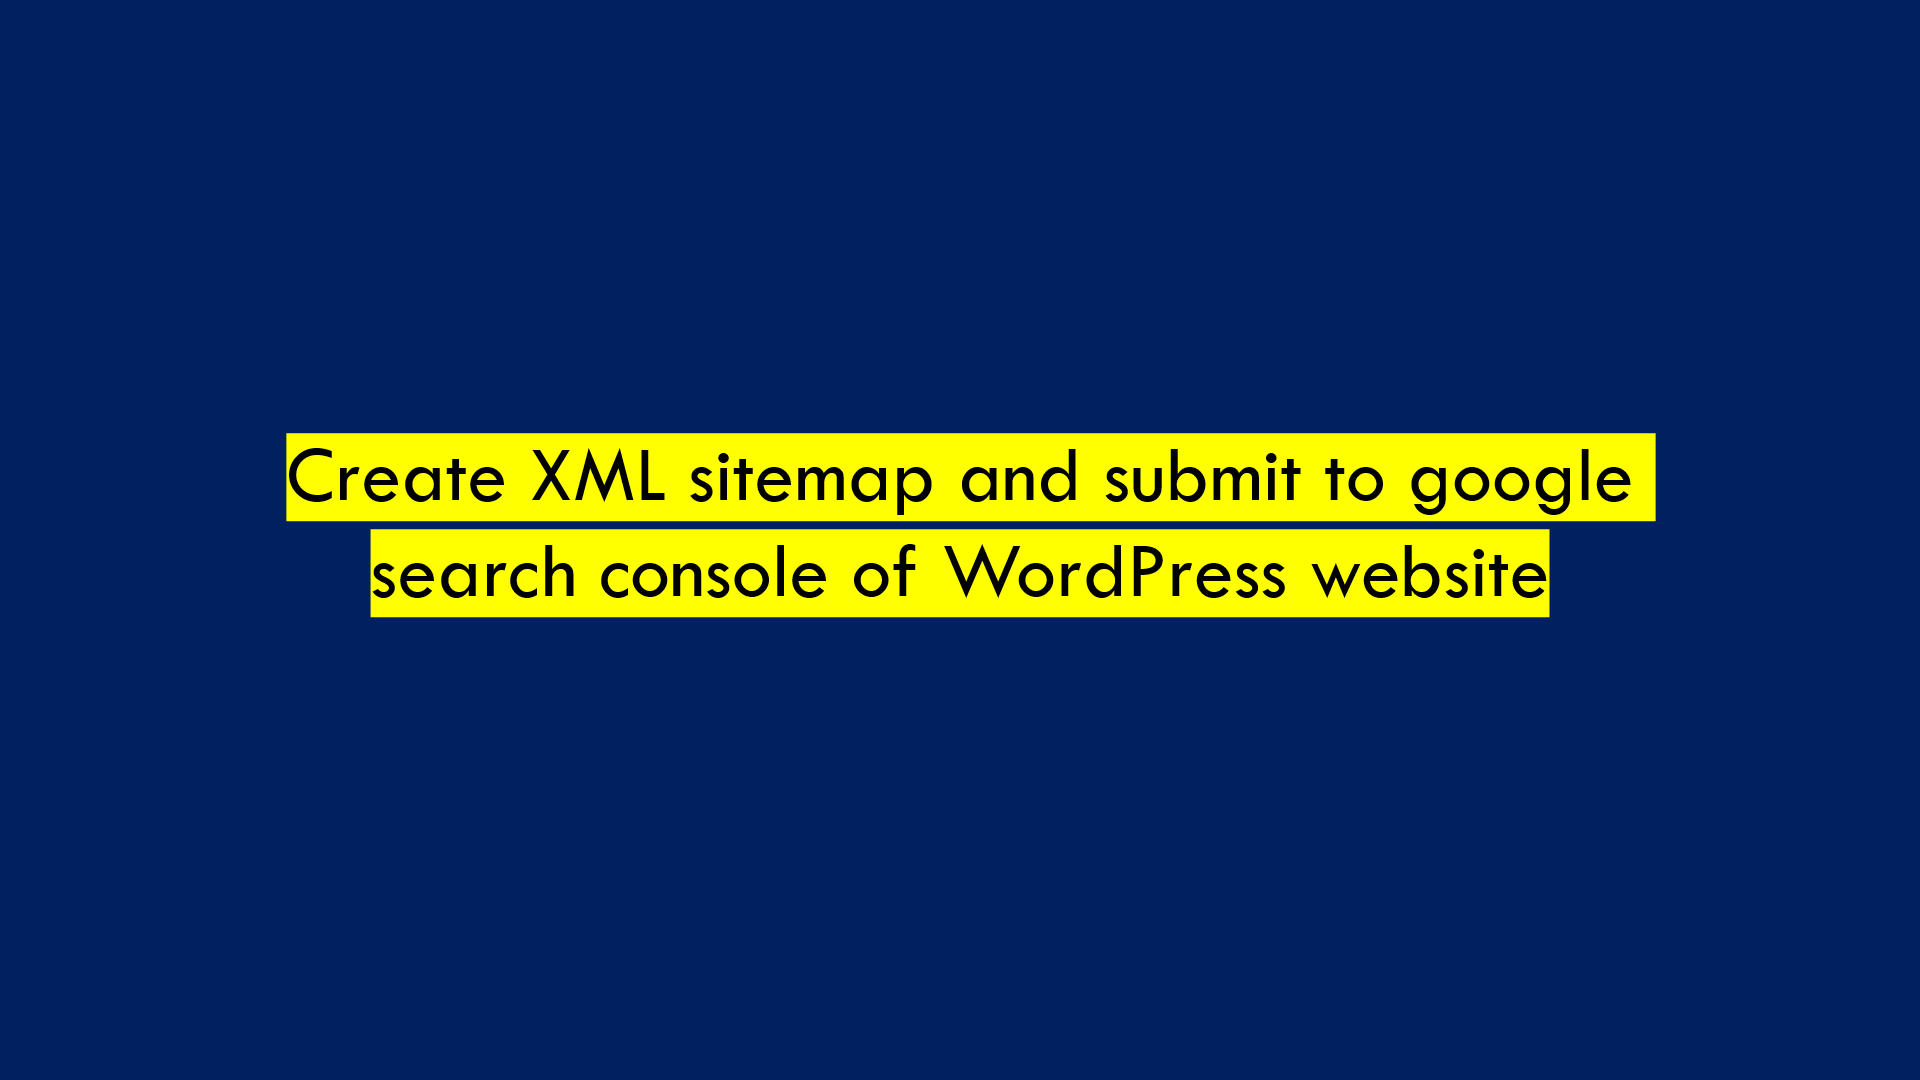 Create XML sitemap and submit to google search console of WordPress website